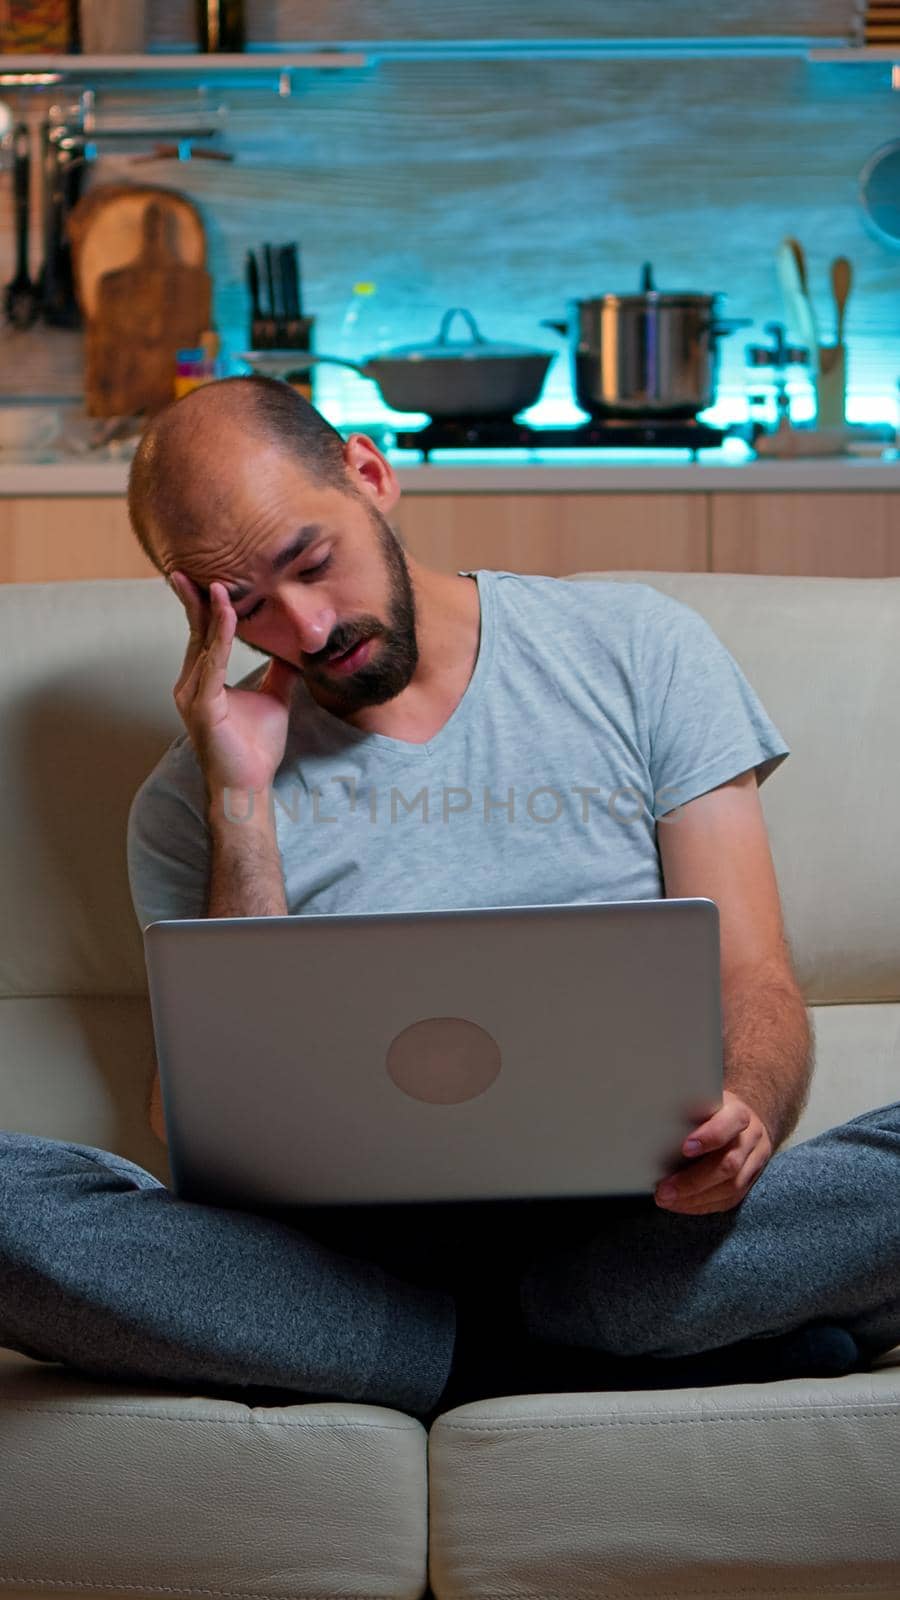 Tired man in pajams browsing on internet lifestyle information by DCStudio